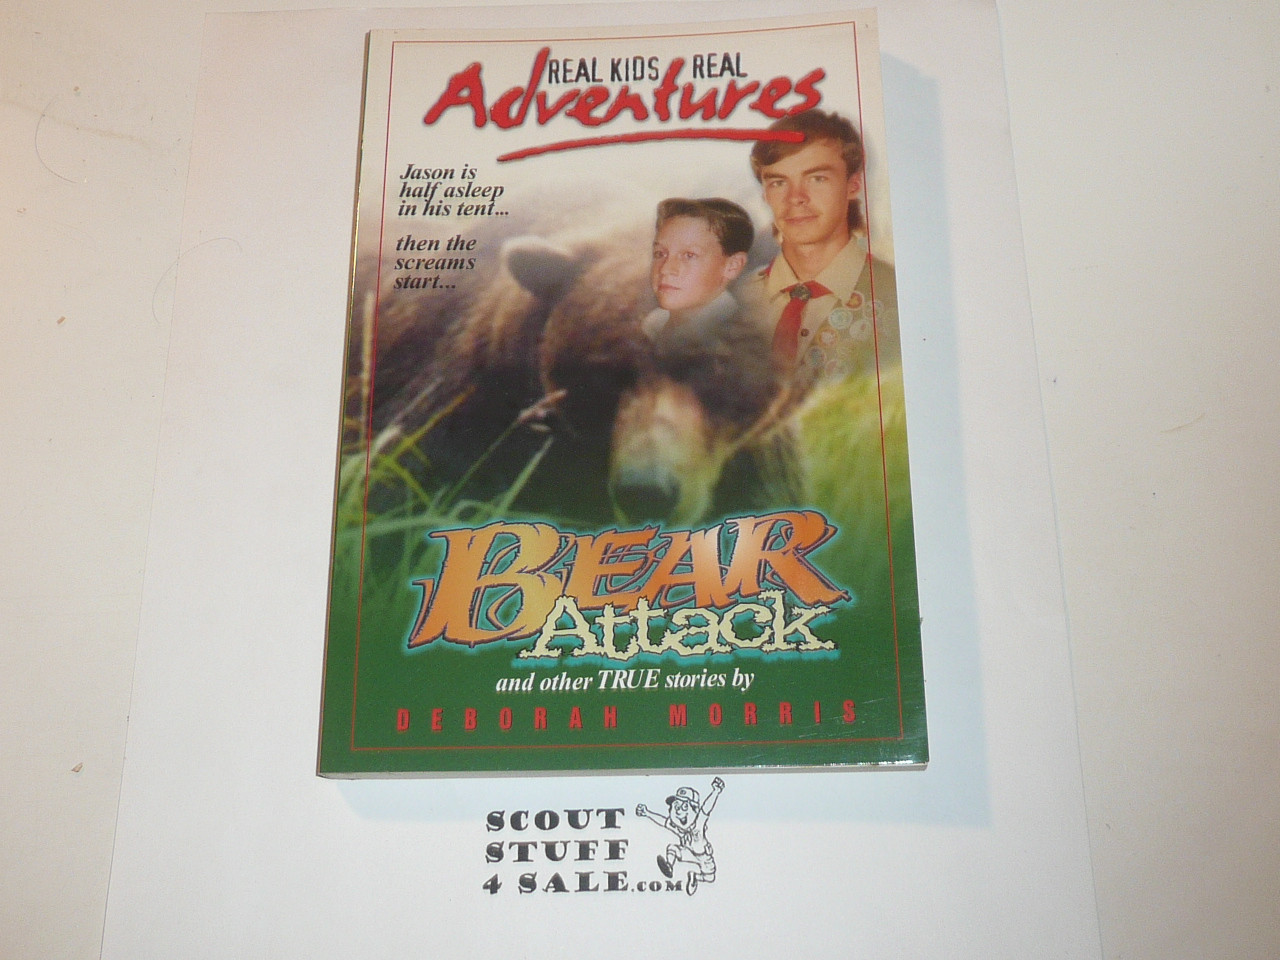 Real Kids Real Adventures, A Scouting related story, by Deborah Morris, 1996